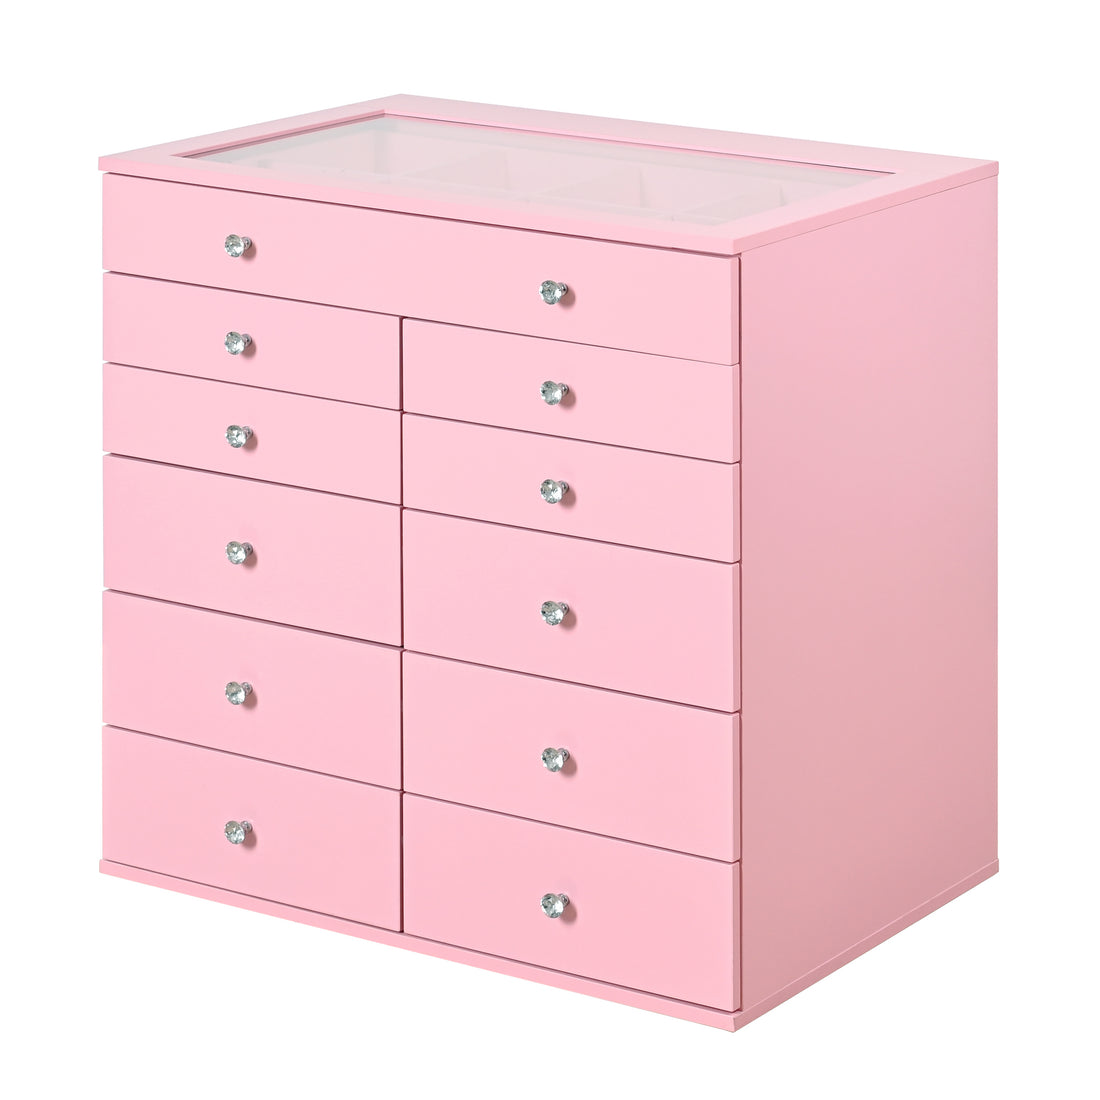 SlayStation Pink Display Chest with Drawers (Copy)